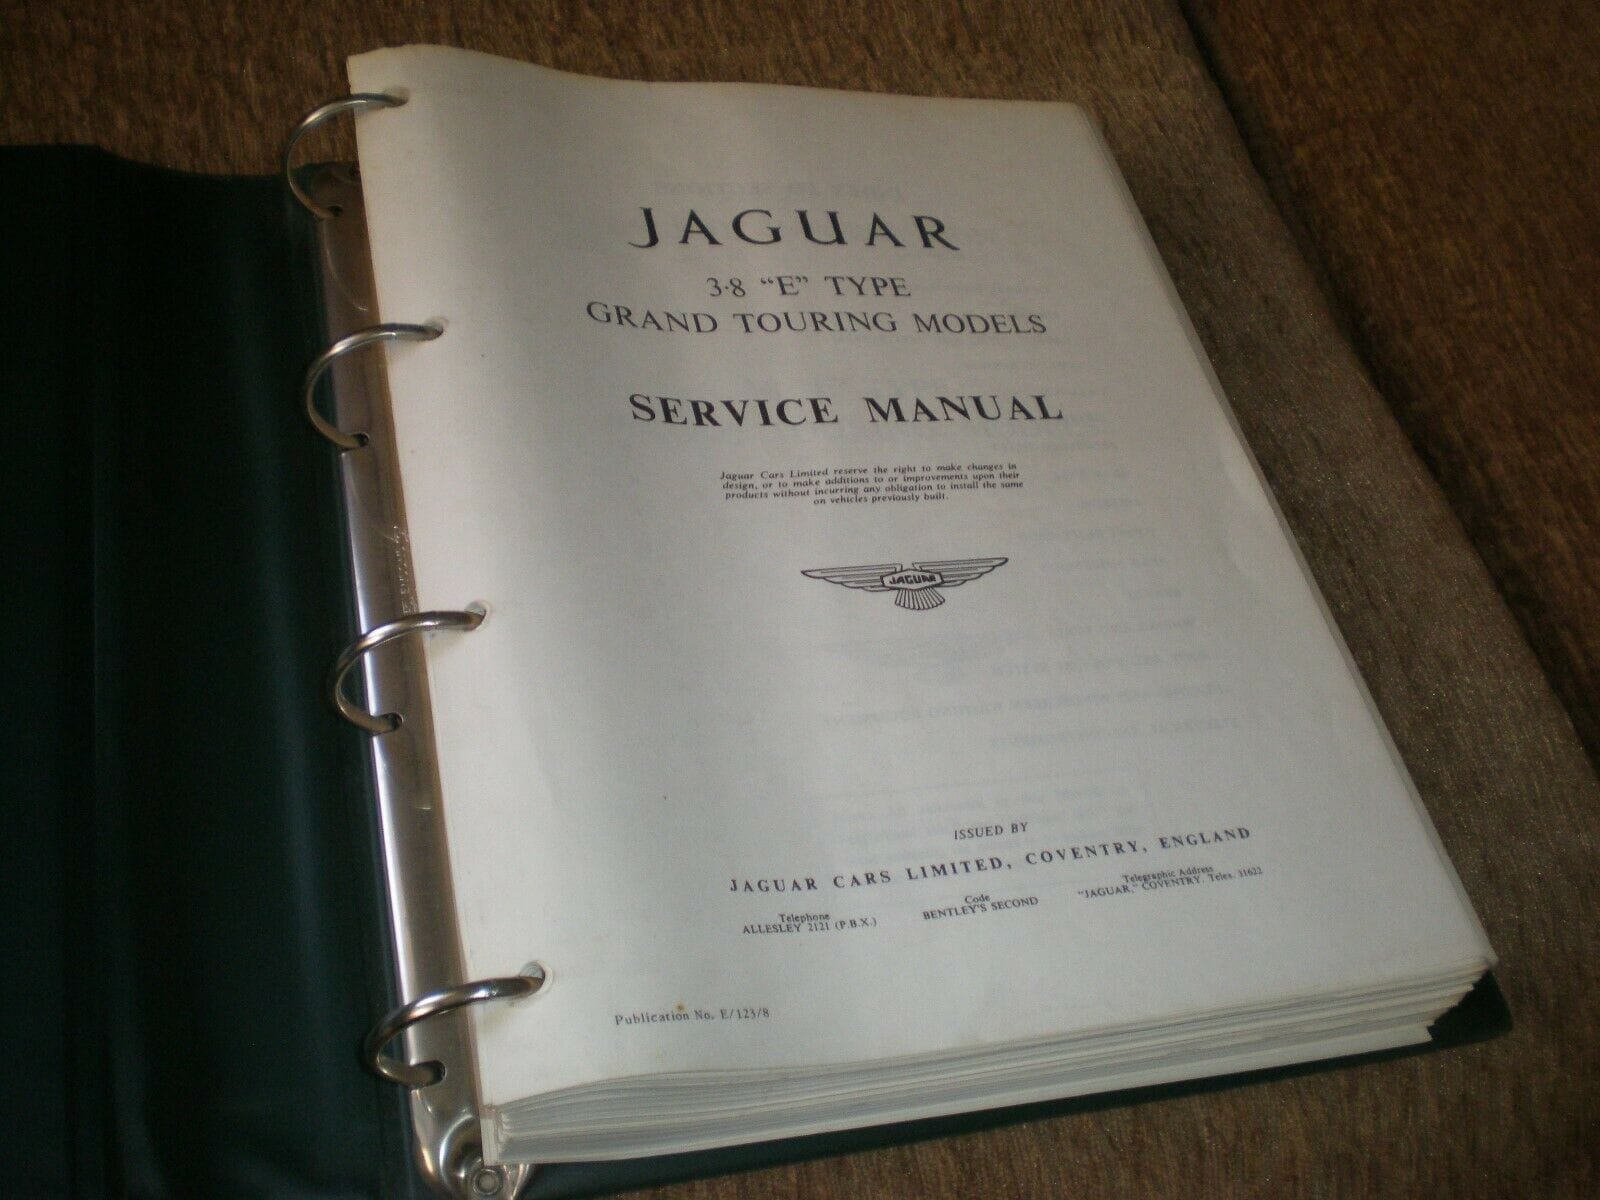 Miscellaneous - XKE E-type factory service manual 3.8L near mint - Used - 1964 to 1967 Jaguar XKE - Chino Hills, CA 91709, United States